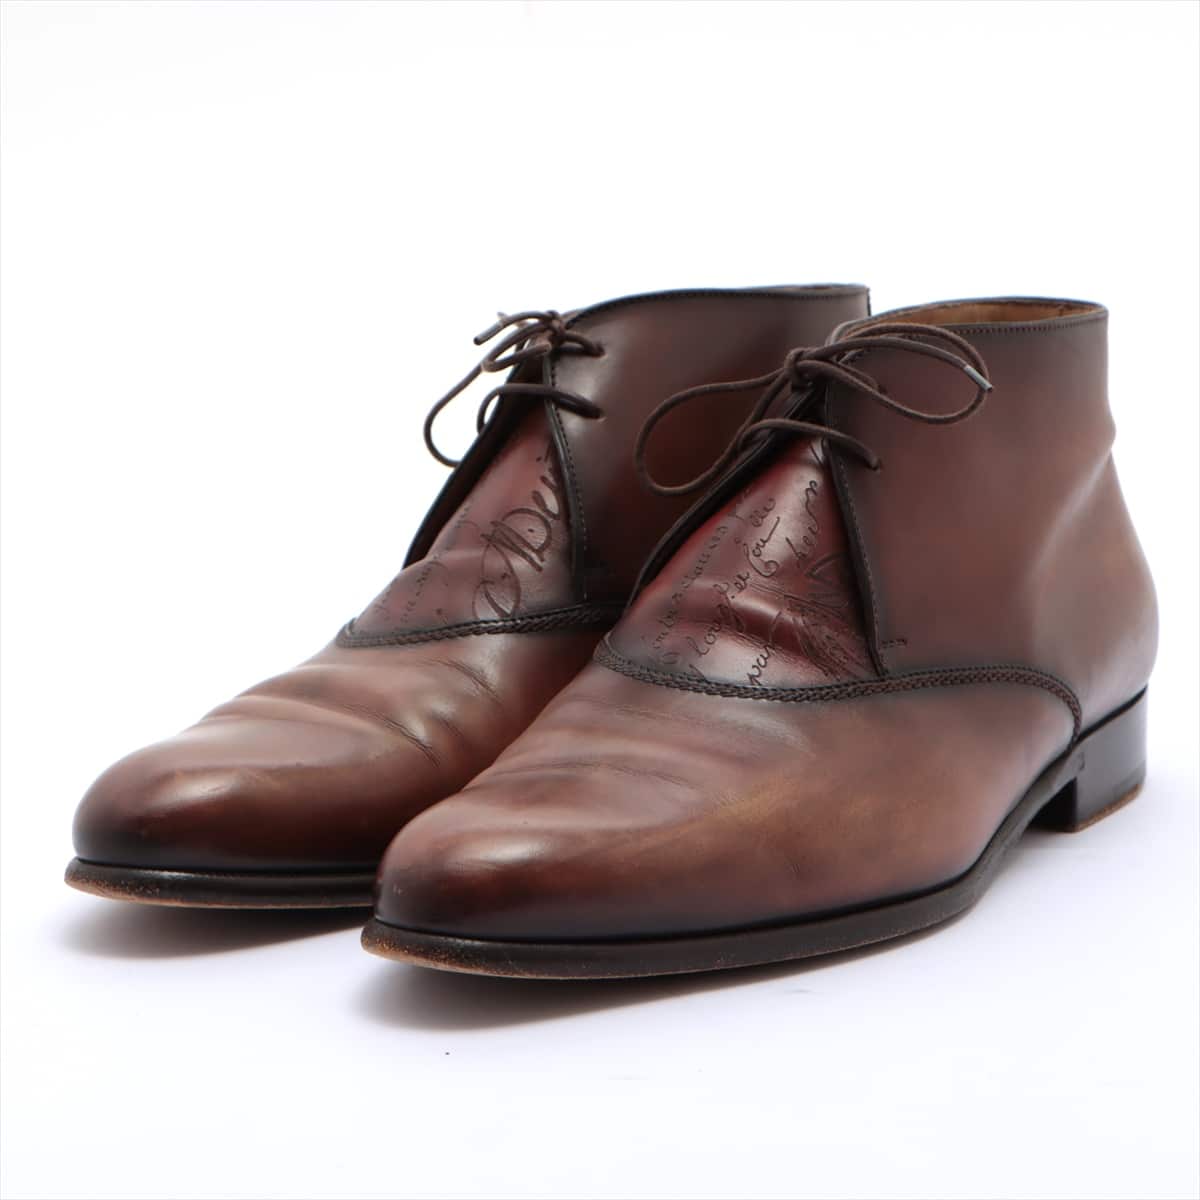 Berluti Leather Chukka Boots 8 Men's Brown With genuine shoe tree